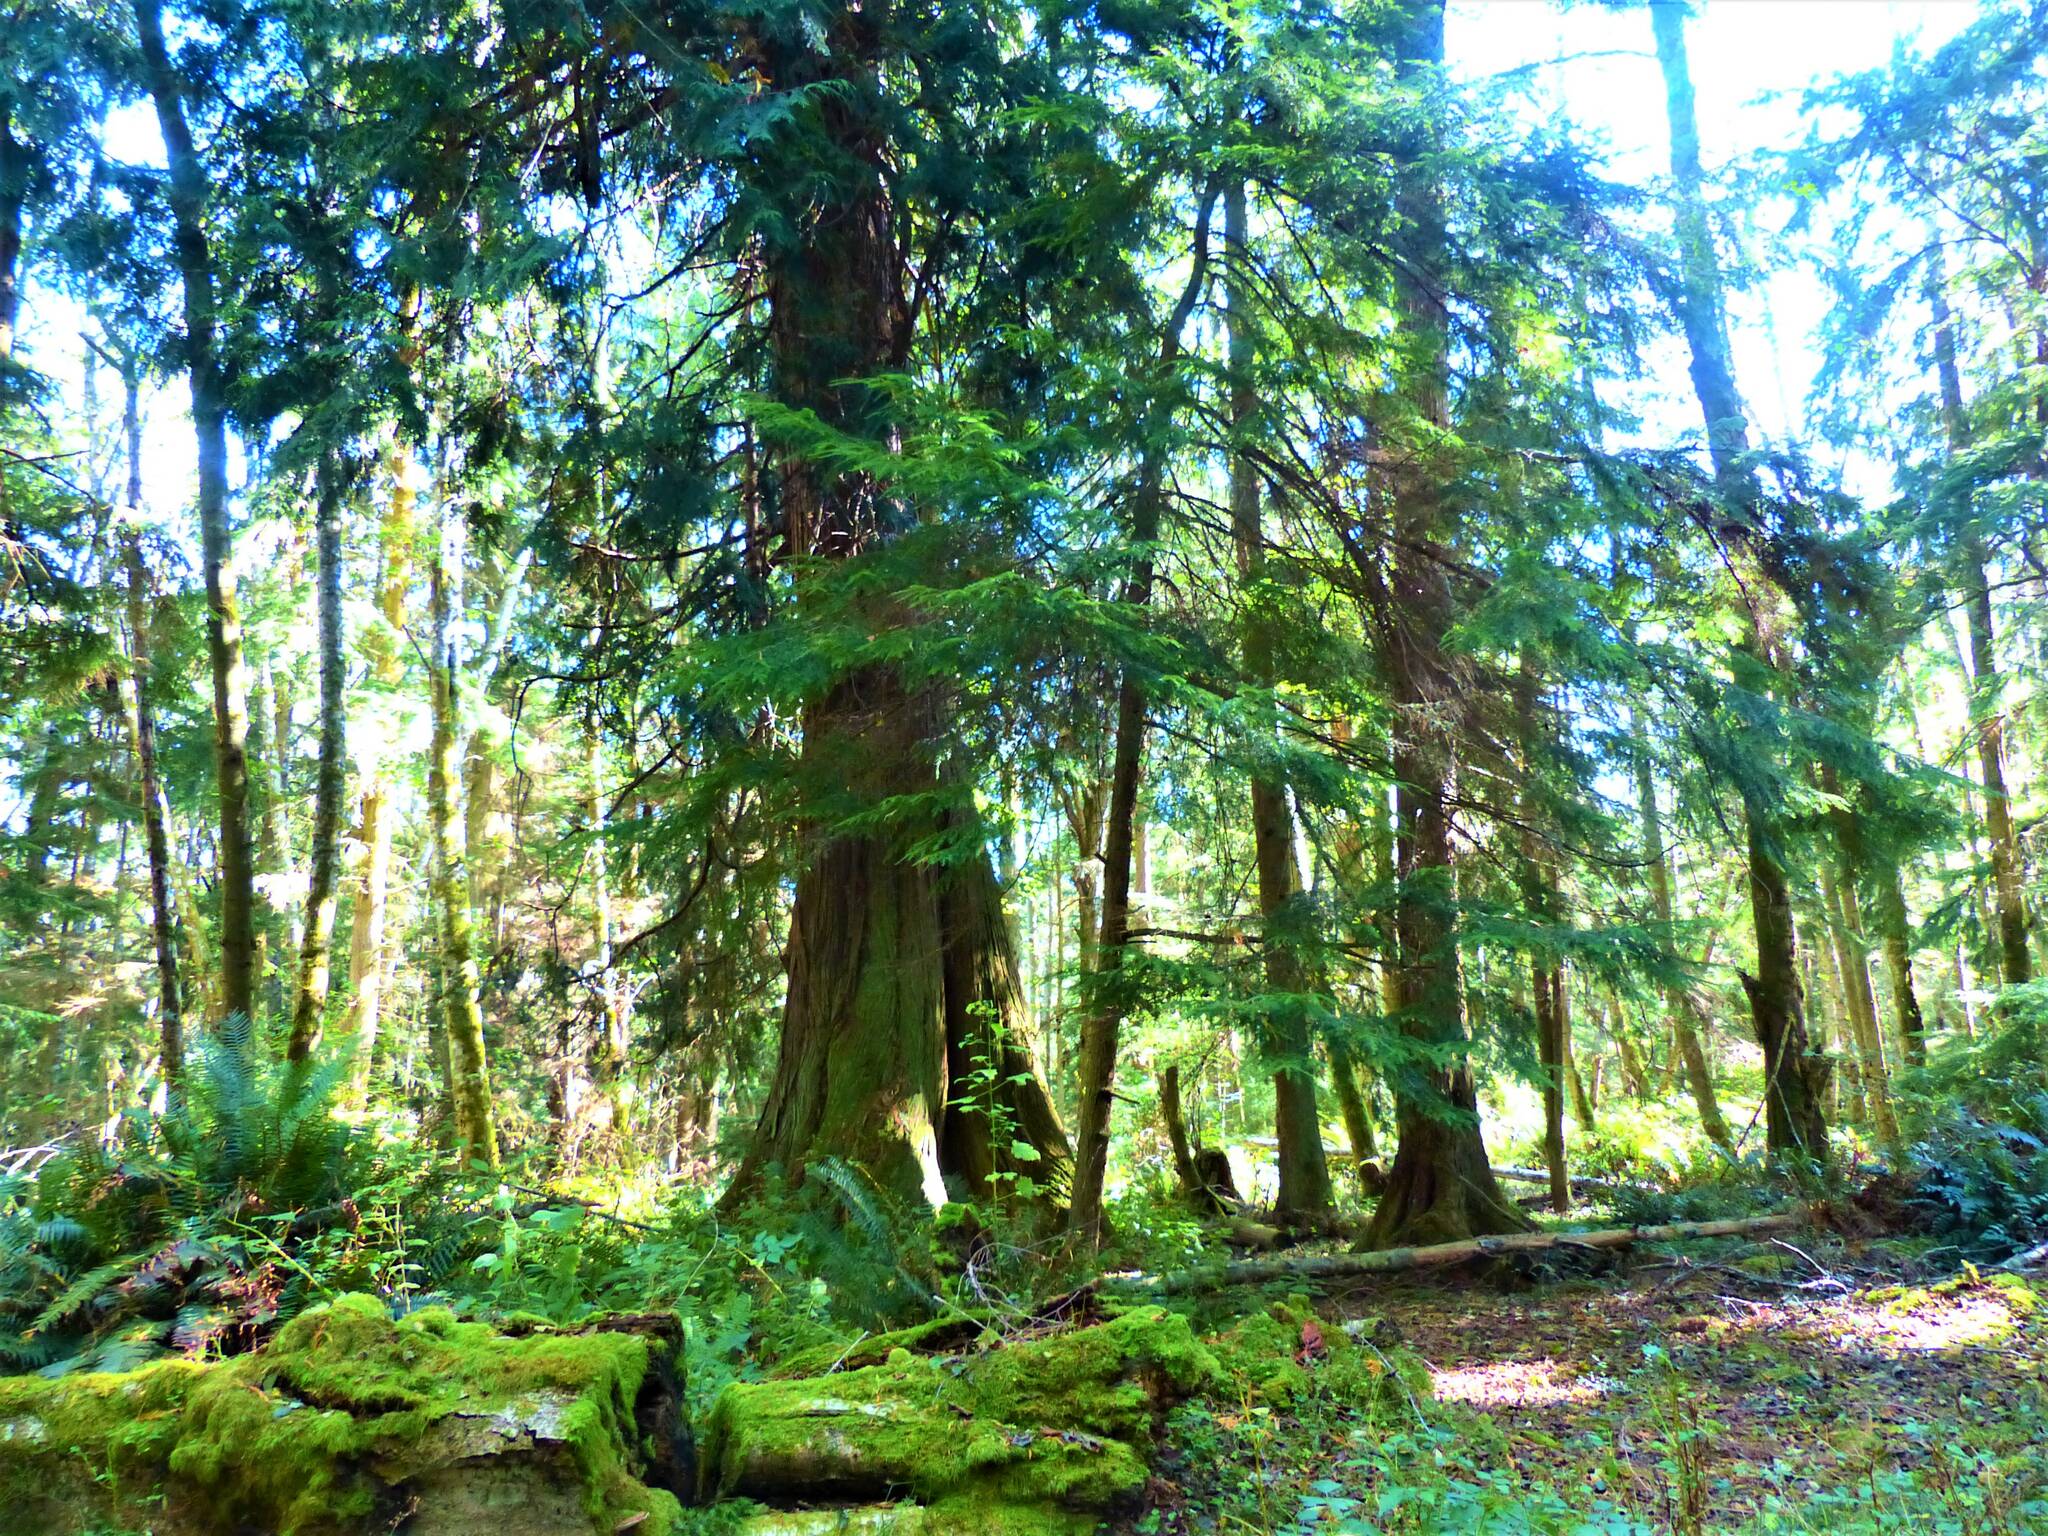 The Whidbey Camano Land Trust plans to preserve 300 acres of forest land that will be called the Lagoon Point Community Forest. (Land Trust photo)